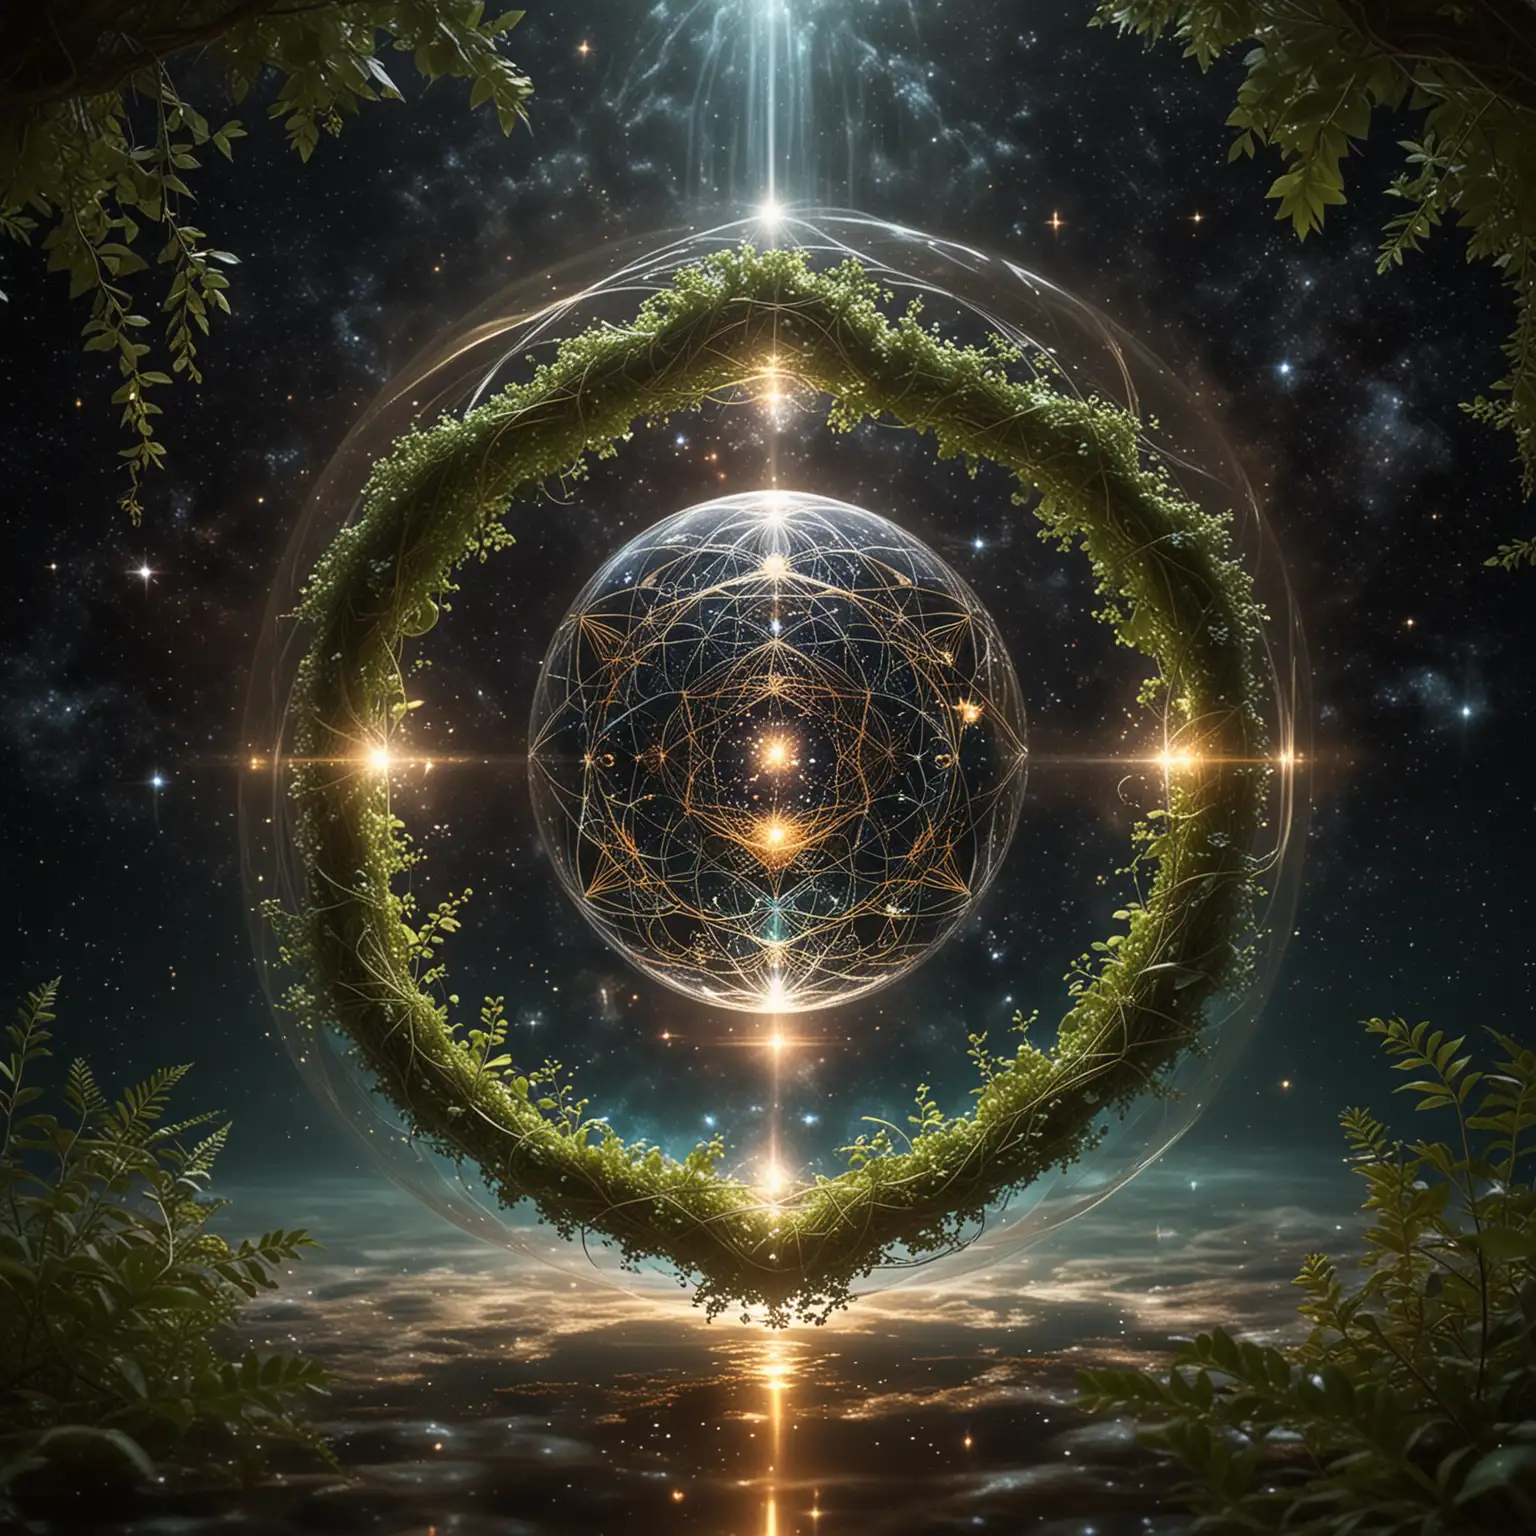 Sacred Geometry Floating Orb in Space with Illuminated Foliage Border